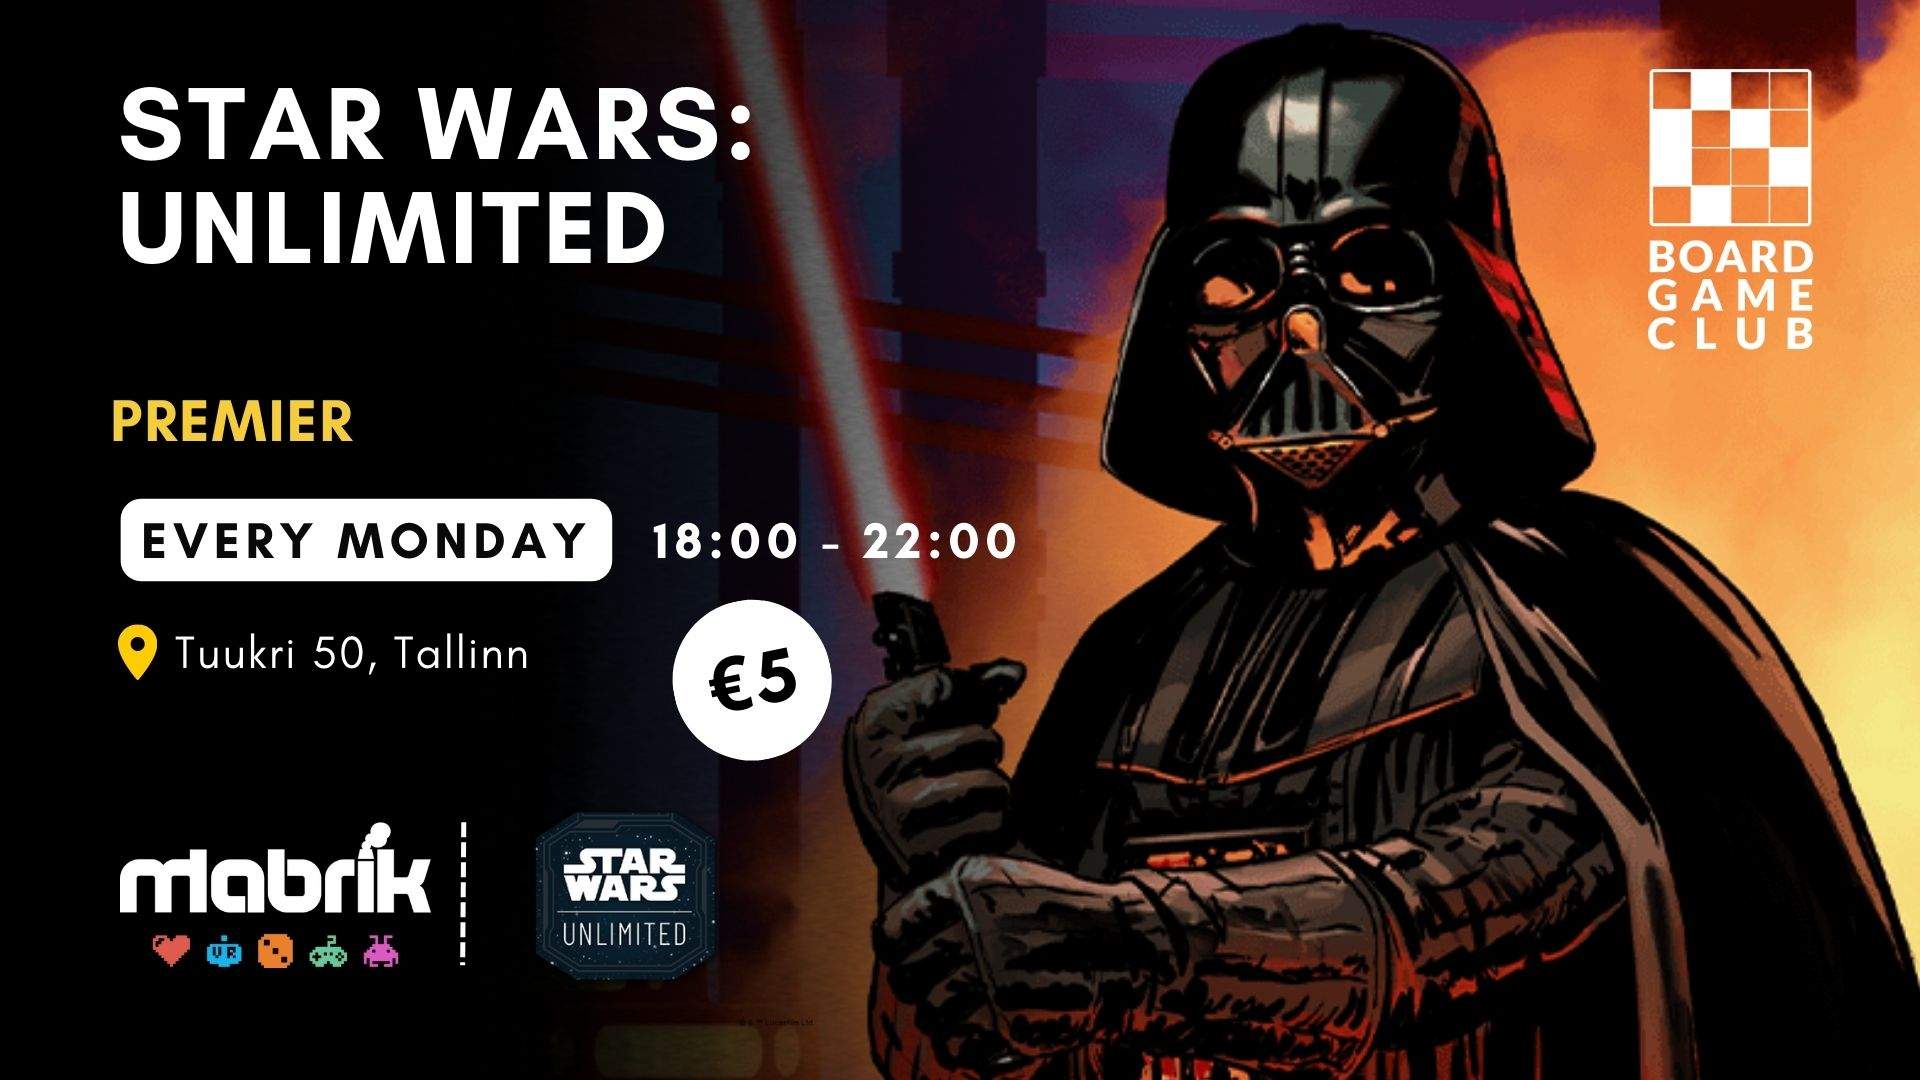 Events - Weekly Star Wars: Unlimited - Premier